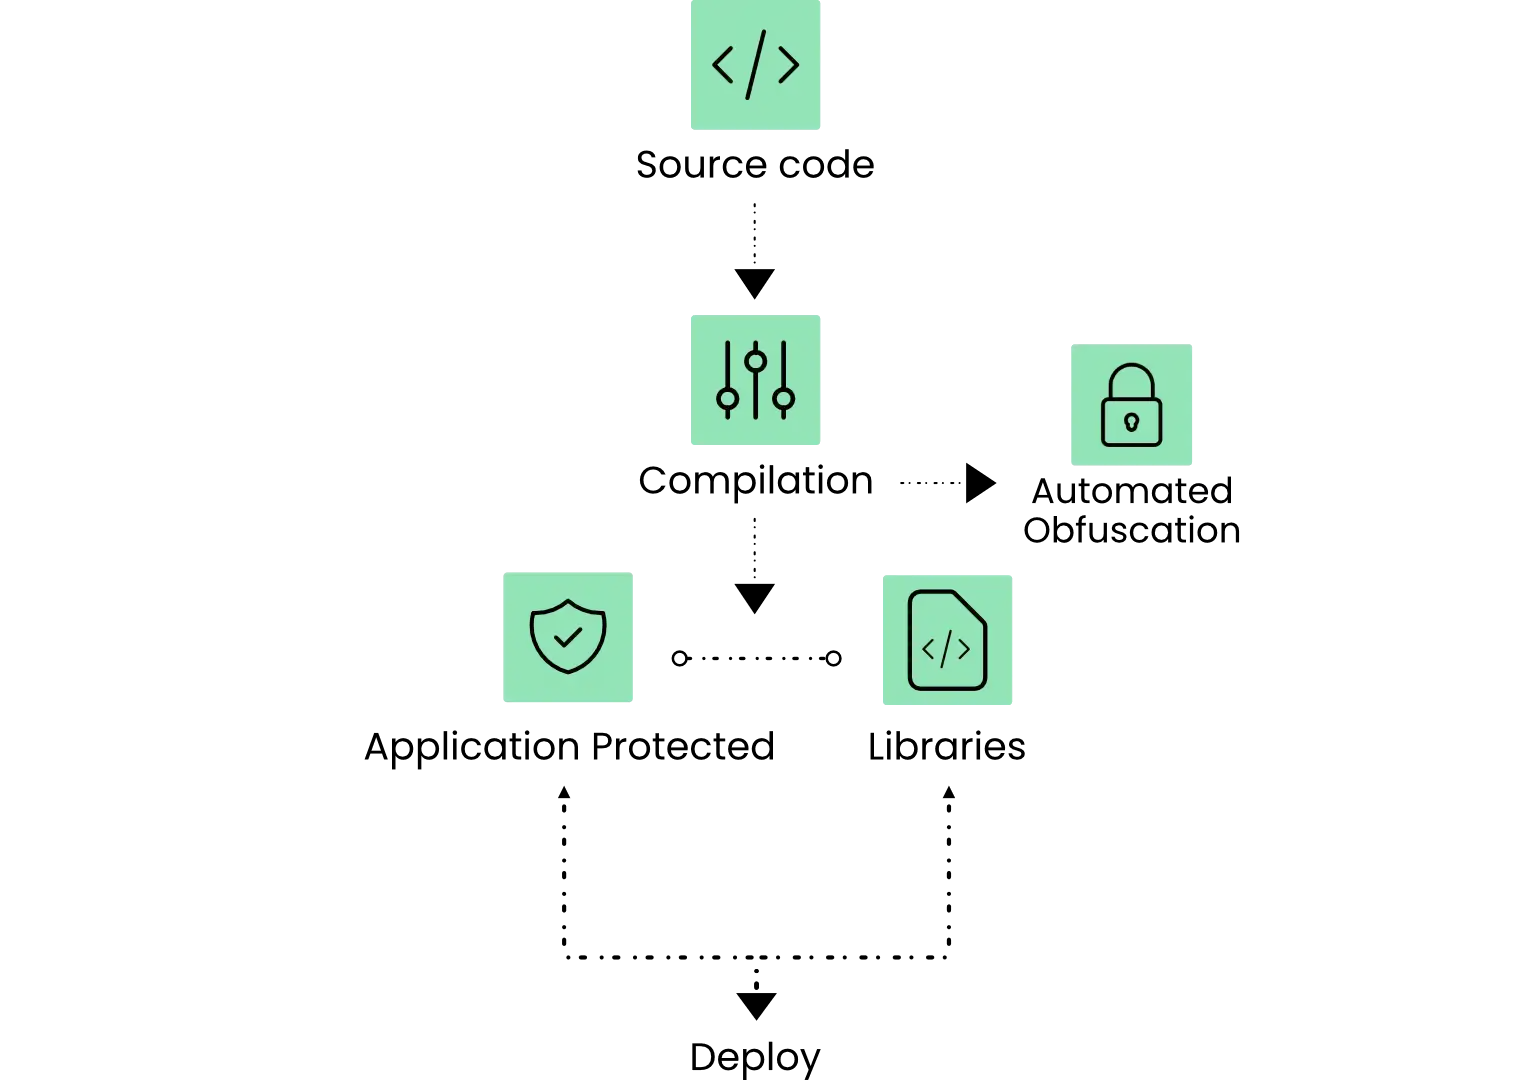 control flow obfuscation